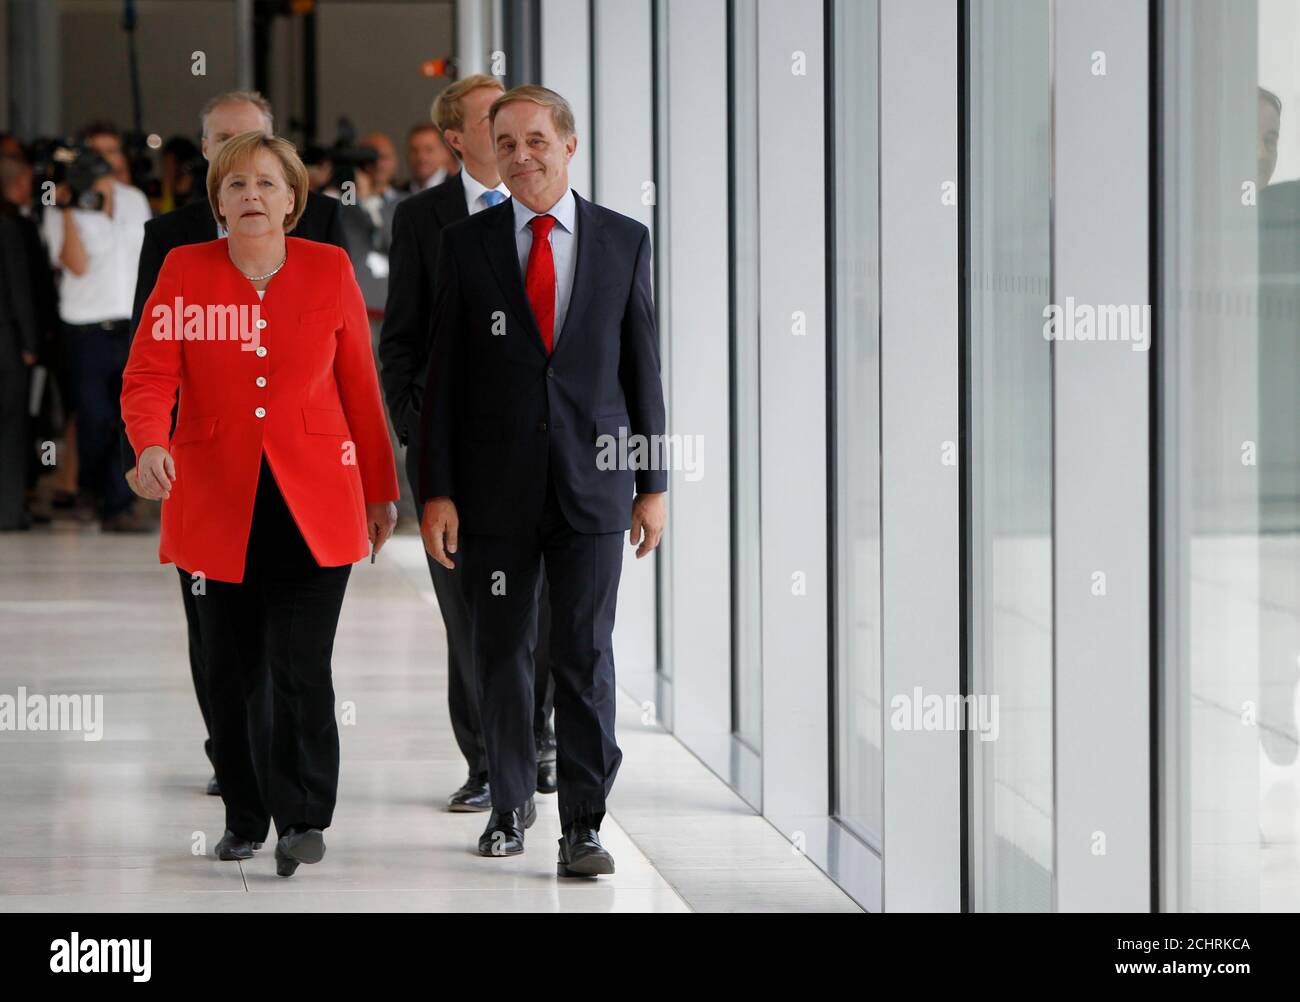 German Chancellor and head of the Christian Democratic Union (CDU) Angela Merkel (L) arrives with Joerg van Essen of the liberal Free Democratic Party (FDP) to join a FDP parliamentary group meeting in Berlin, July 6, 2010. REUTERS/Thomas Peter  (GERMANY - Tags: POLITICS) Stock Photo